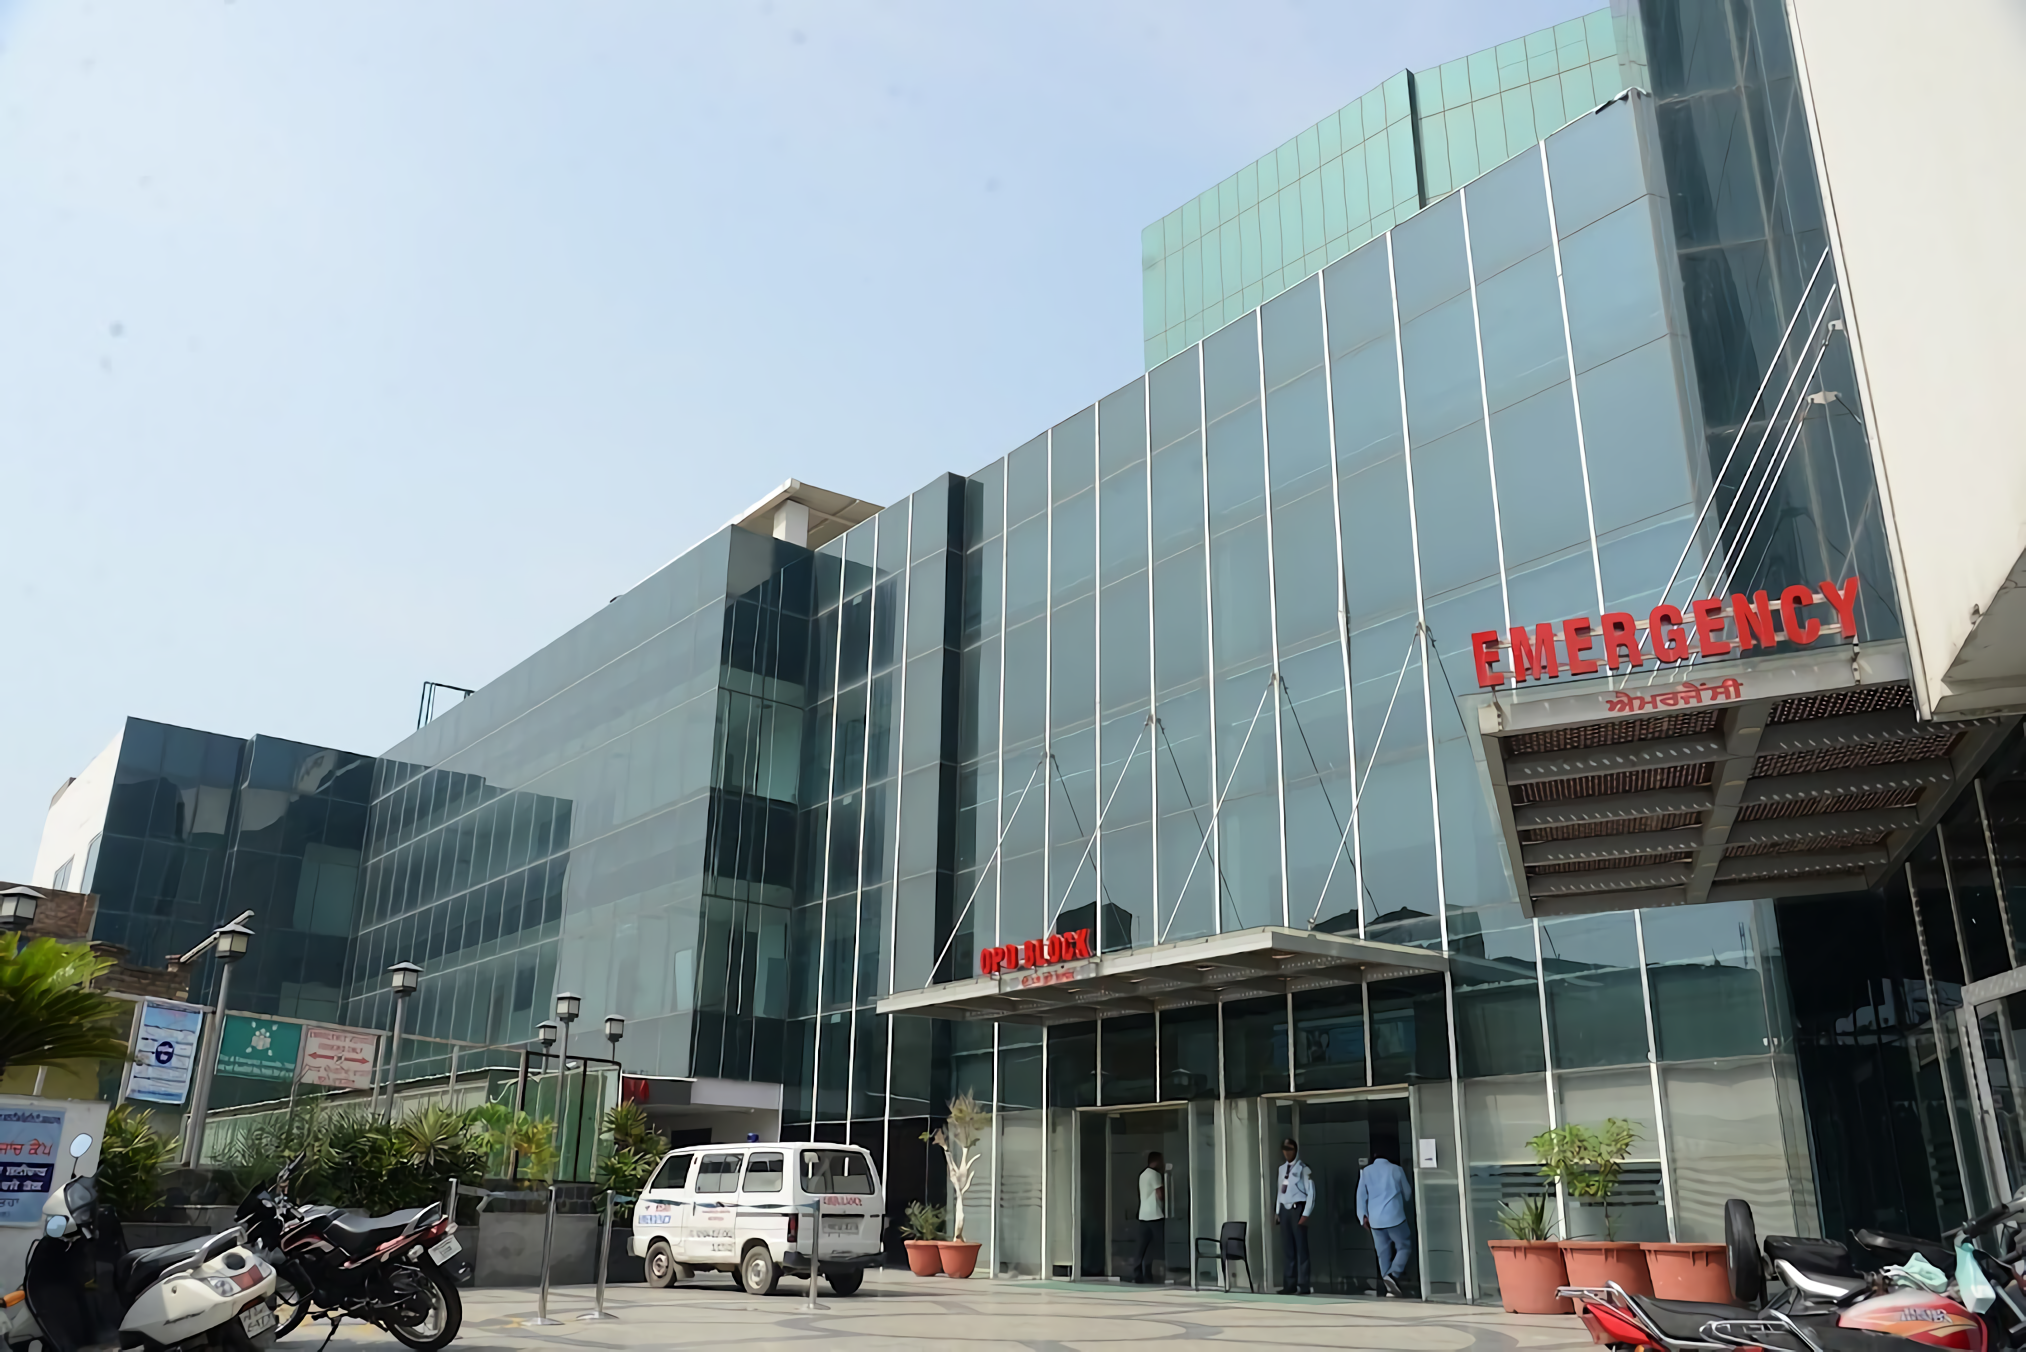 Delhi Heart Institute And Multispeciality Hospital